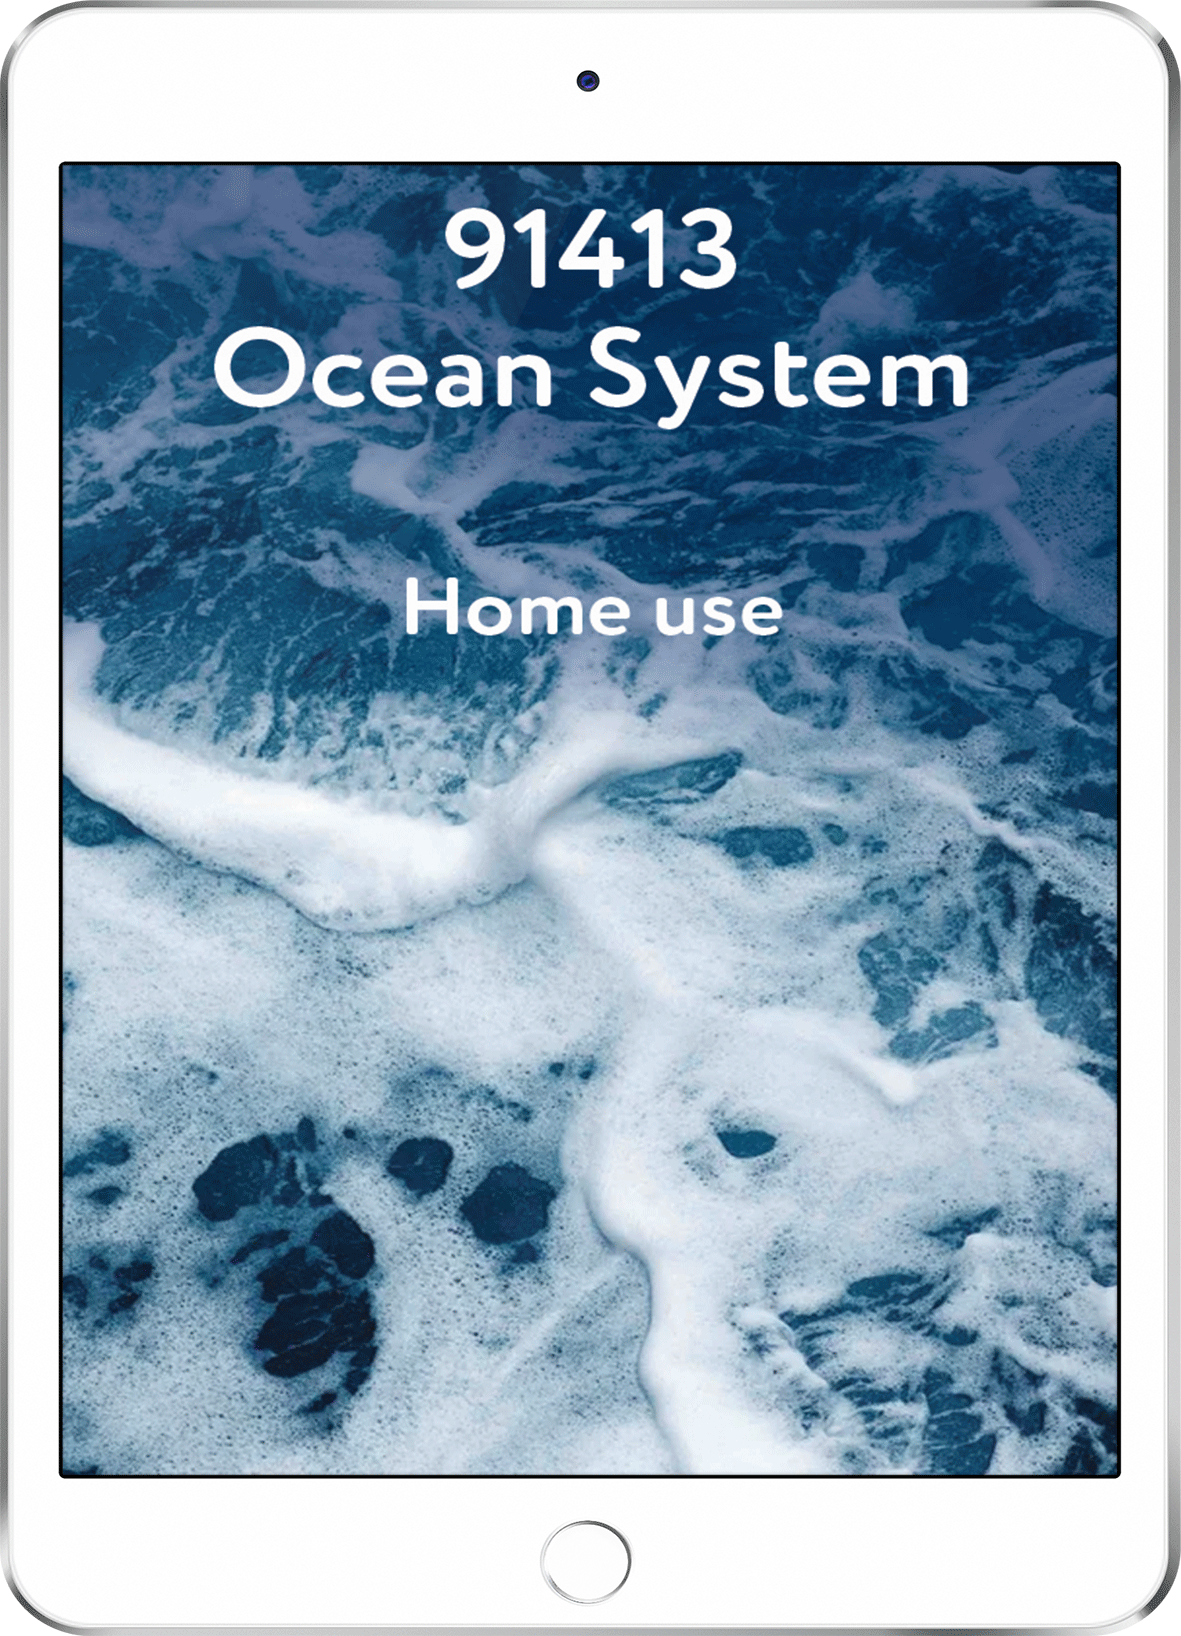 91413 Ocean System - Home Use